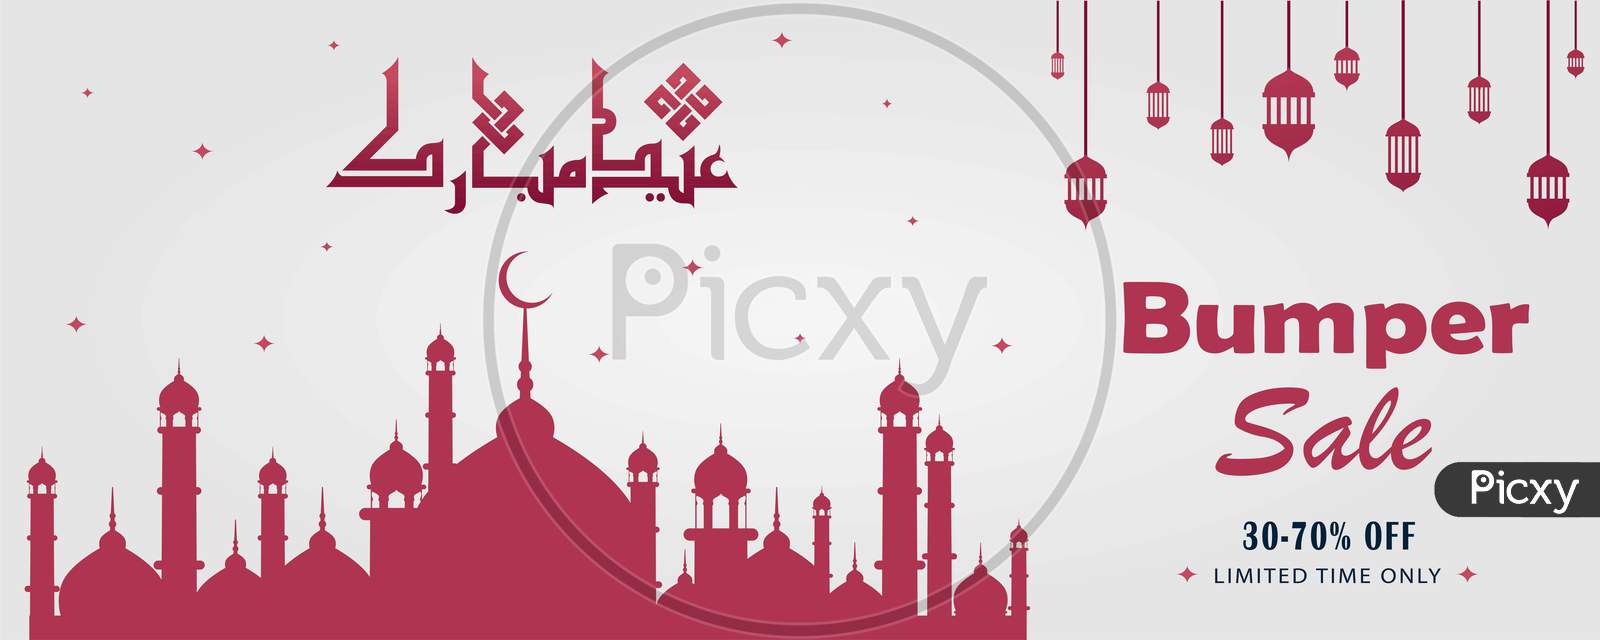 Eid Mubarak Sale With Amazing Deals Banner, Poster And Background Illustration Vector